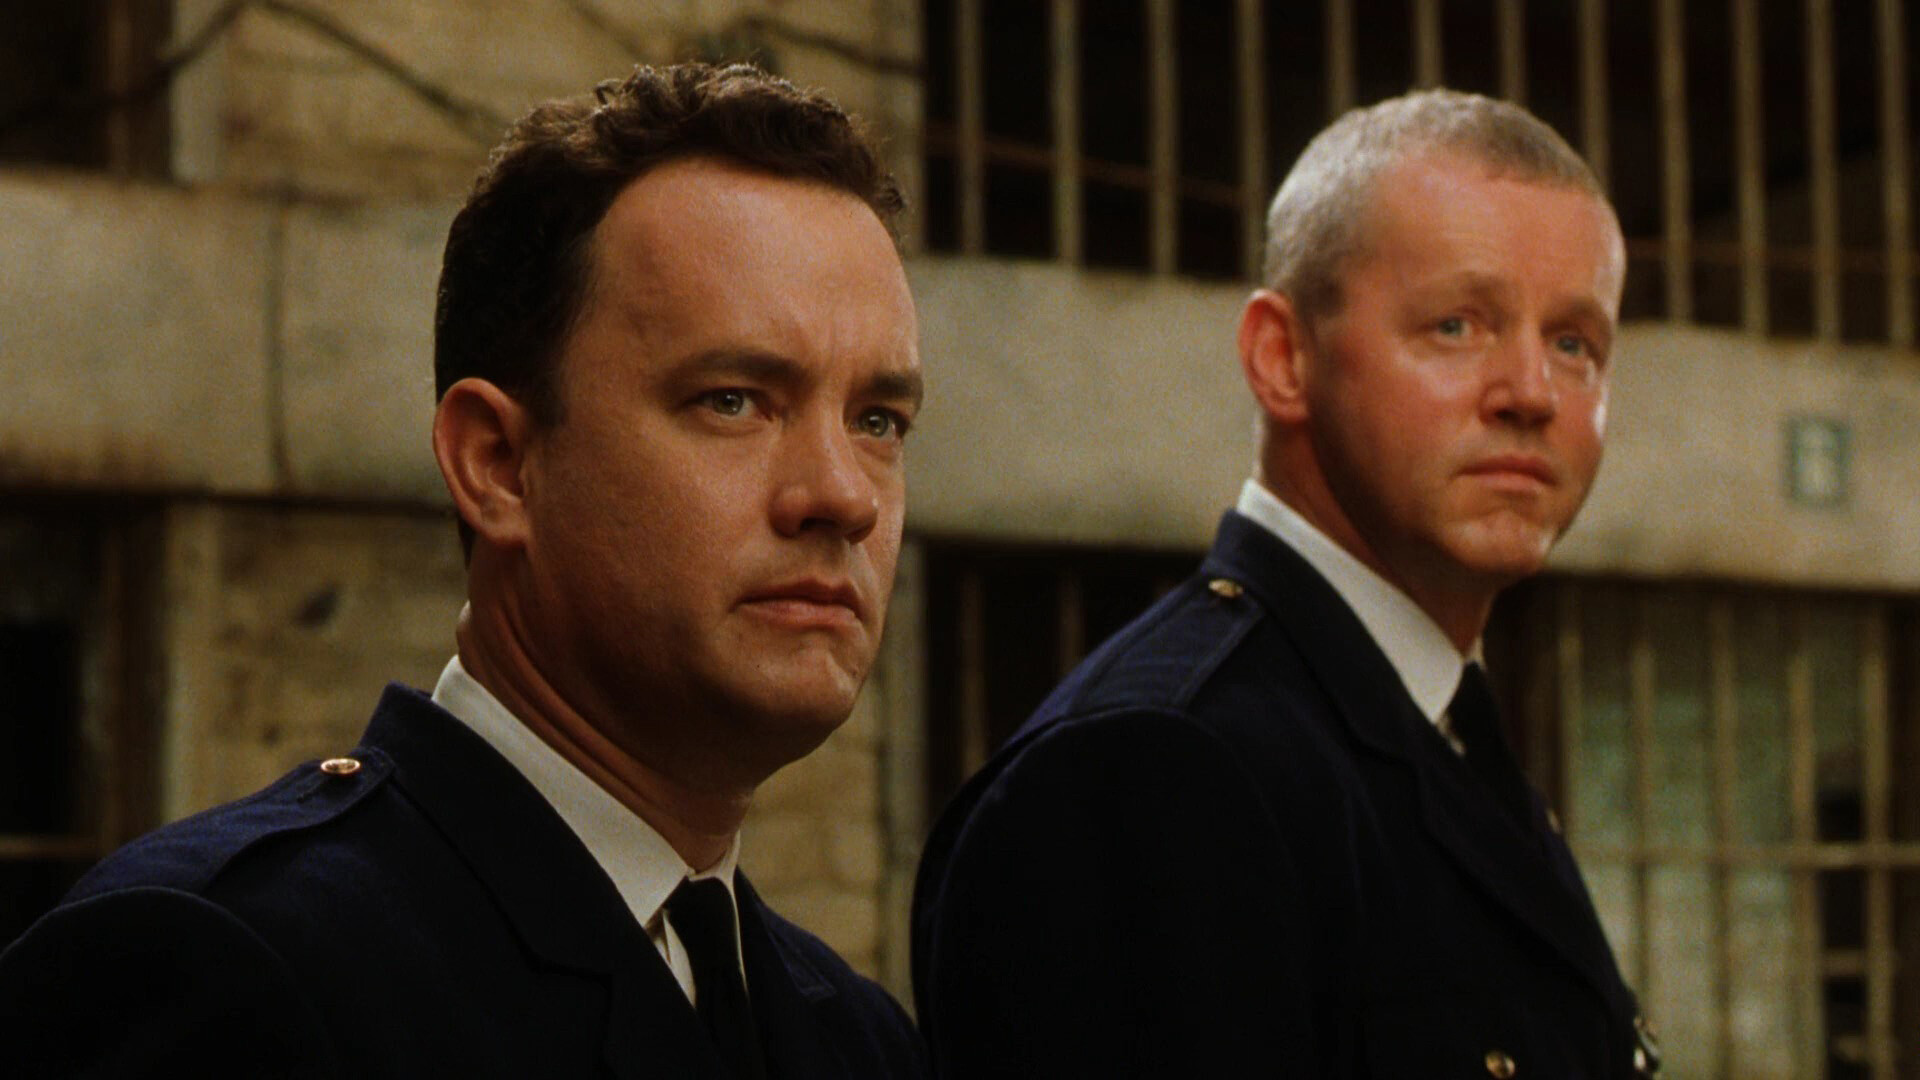 The Green Mile: Paul Edgecomb and Brutus "Brutal" Howell, Fantasy drama film. 1920x1080 Full HD Background.